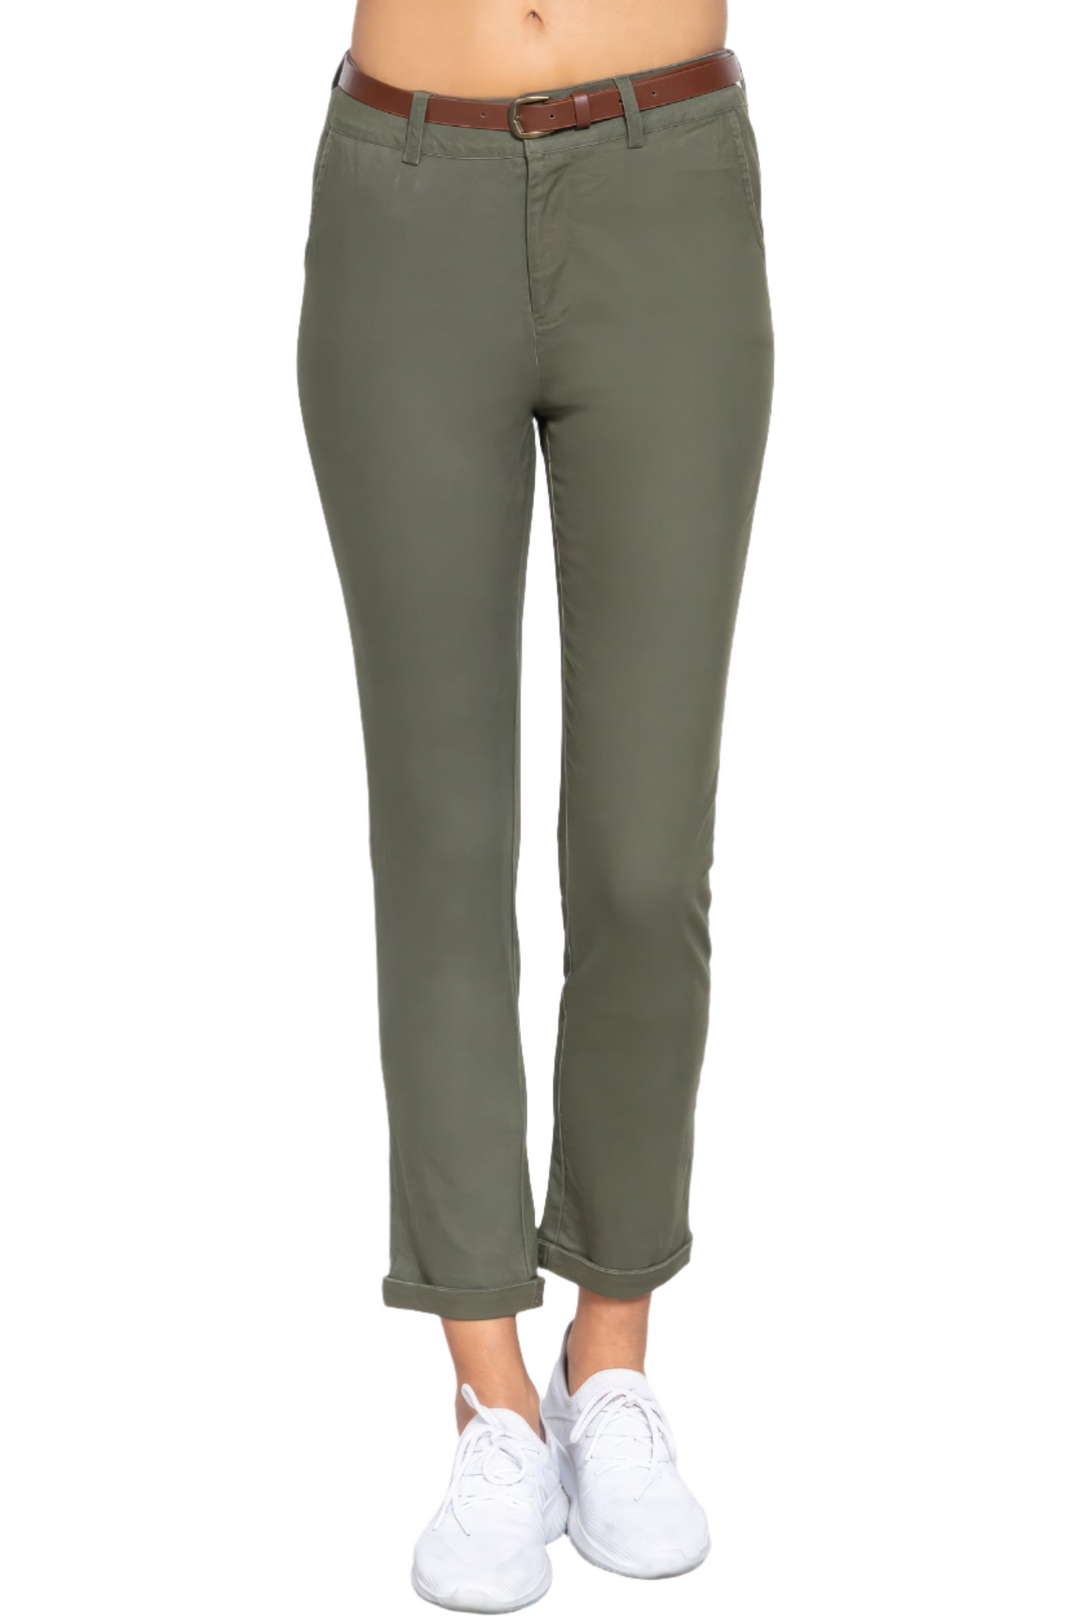 Cotton-Span Twill Belted Long Pants in Olive Oil with Stylish Belt